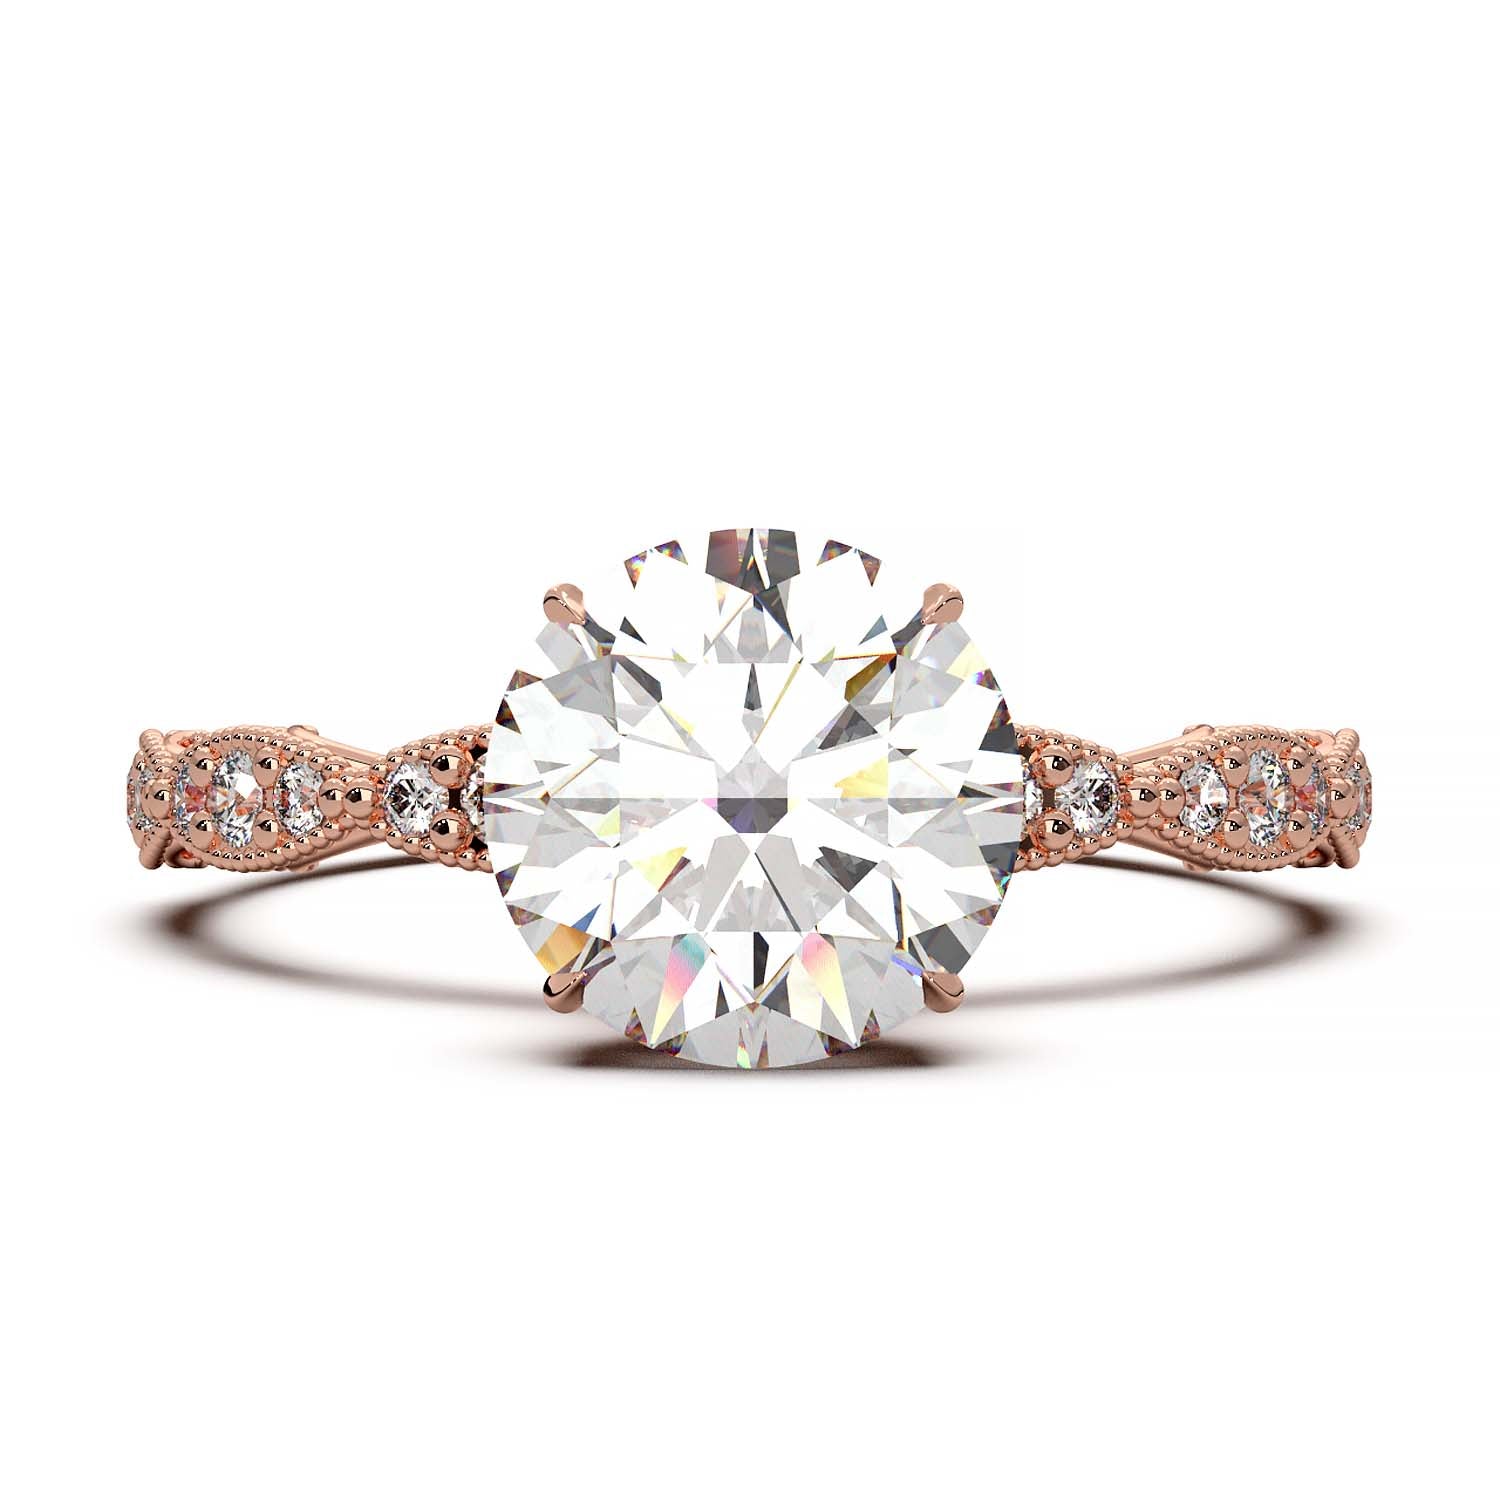 A vintage-style engagement ring featuring a large, round-cut diamond set in a gold band. The band is intricately detailed with smaller diamonds embedded in an ornate, floral and milgrain pattern, adding elegance and sparkle.